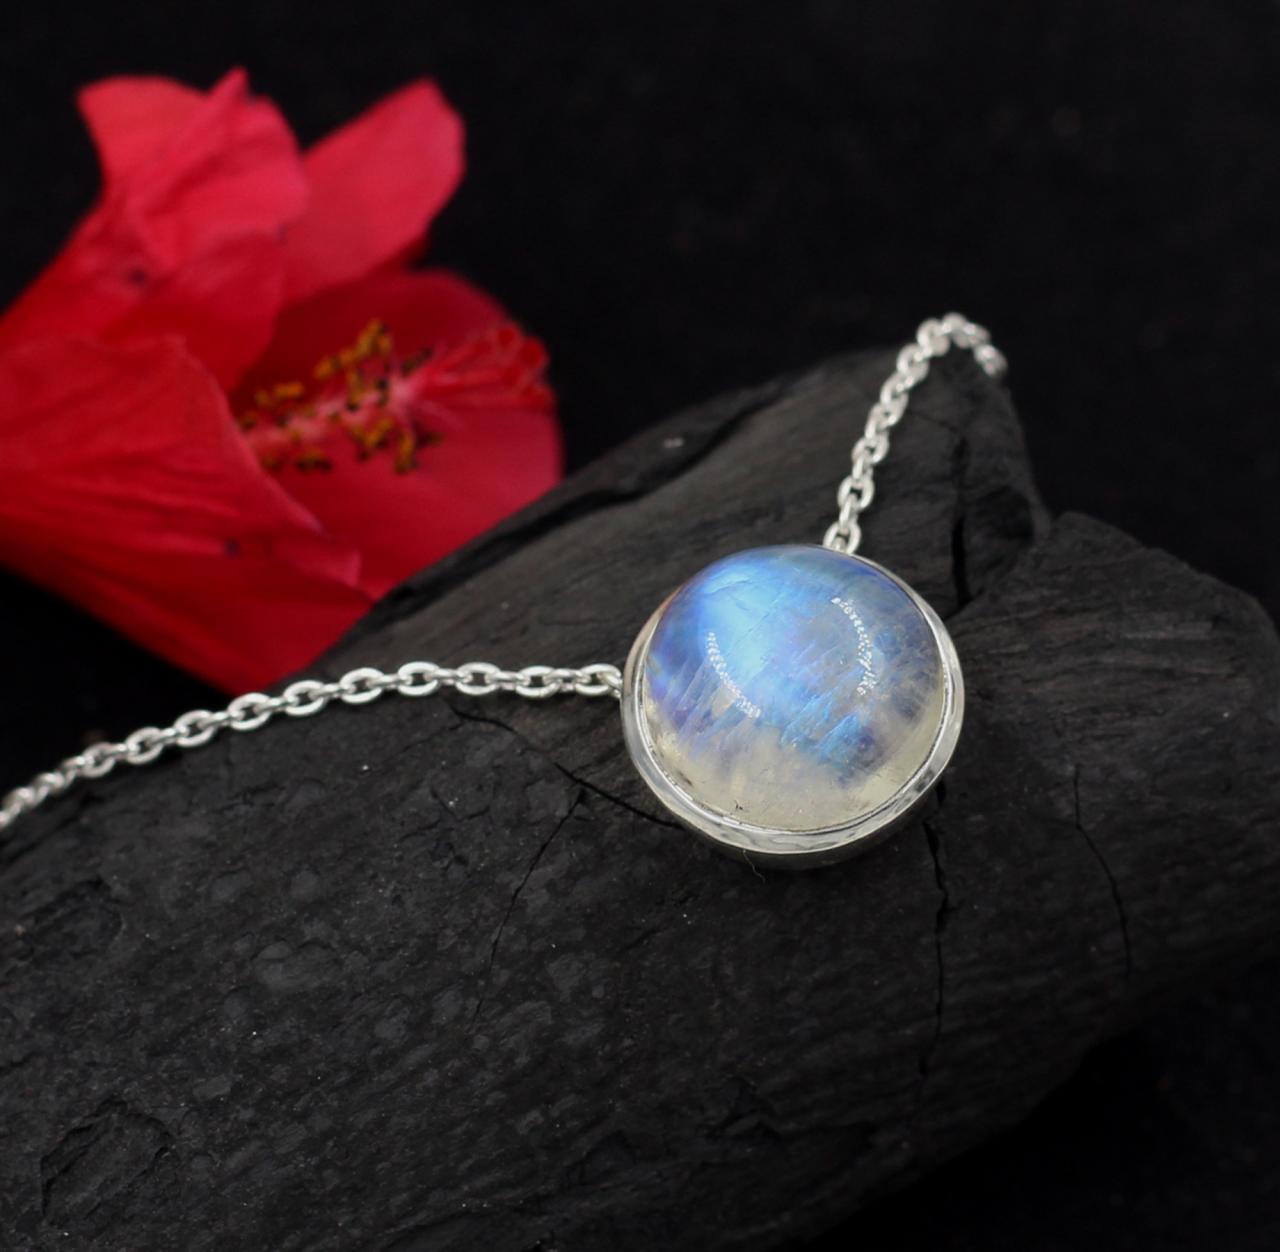 Luscious Rich Rainbow Fire Cabochon 15 Mm Moonstone Necklace,solid 925 Sterling Silver Jewelry,birthday Gift,anniversary Present,gift Mother